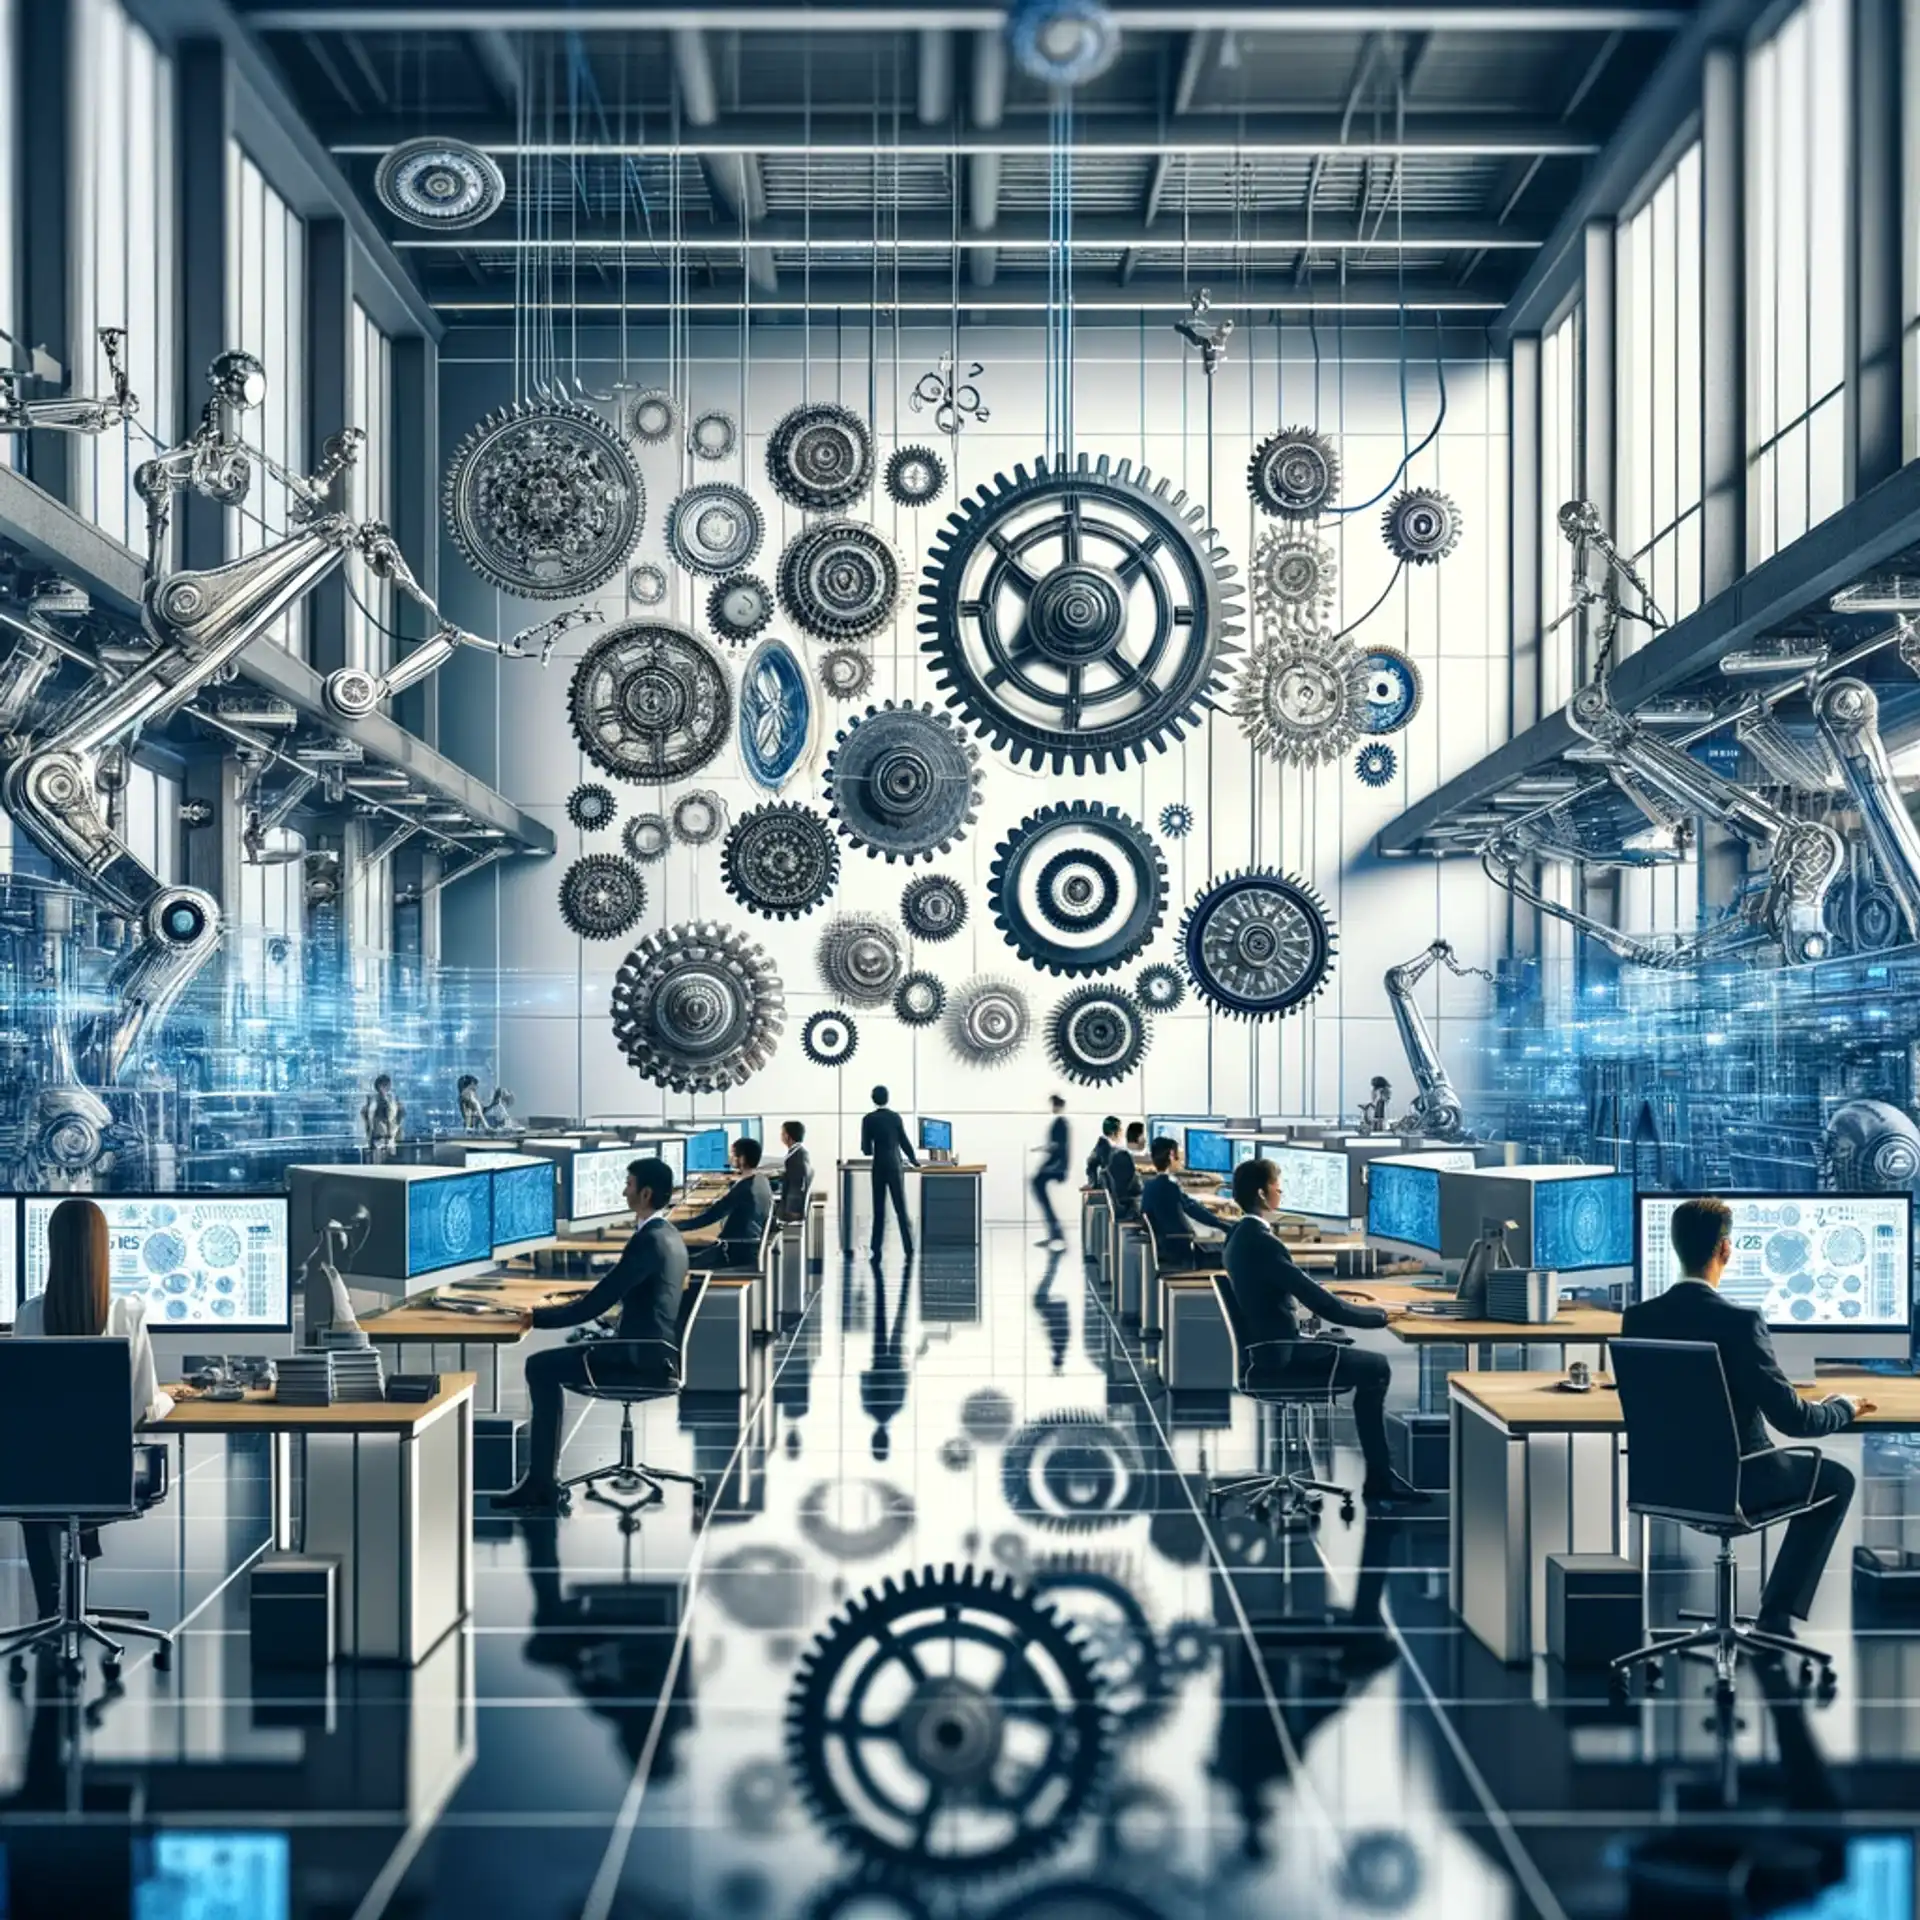 Mastering Efficiency: Automation's Role in a Tech-Driven Future